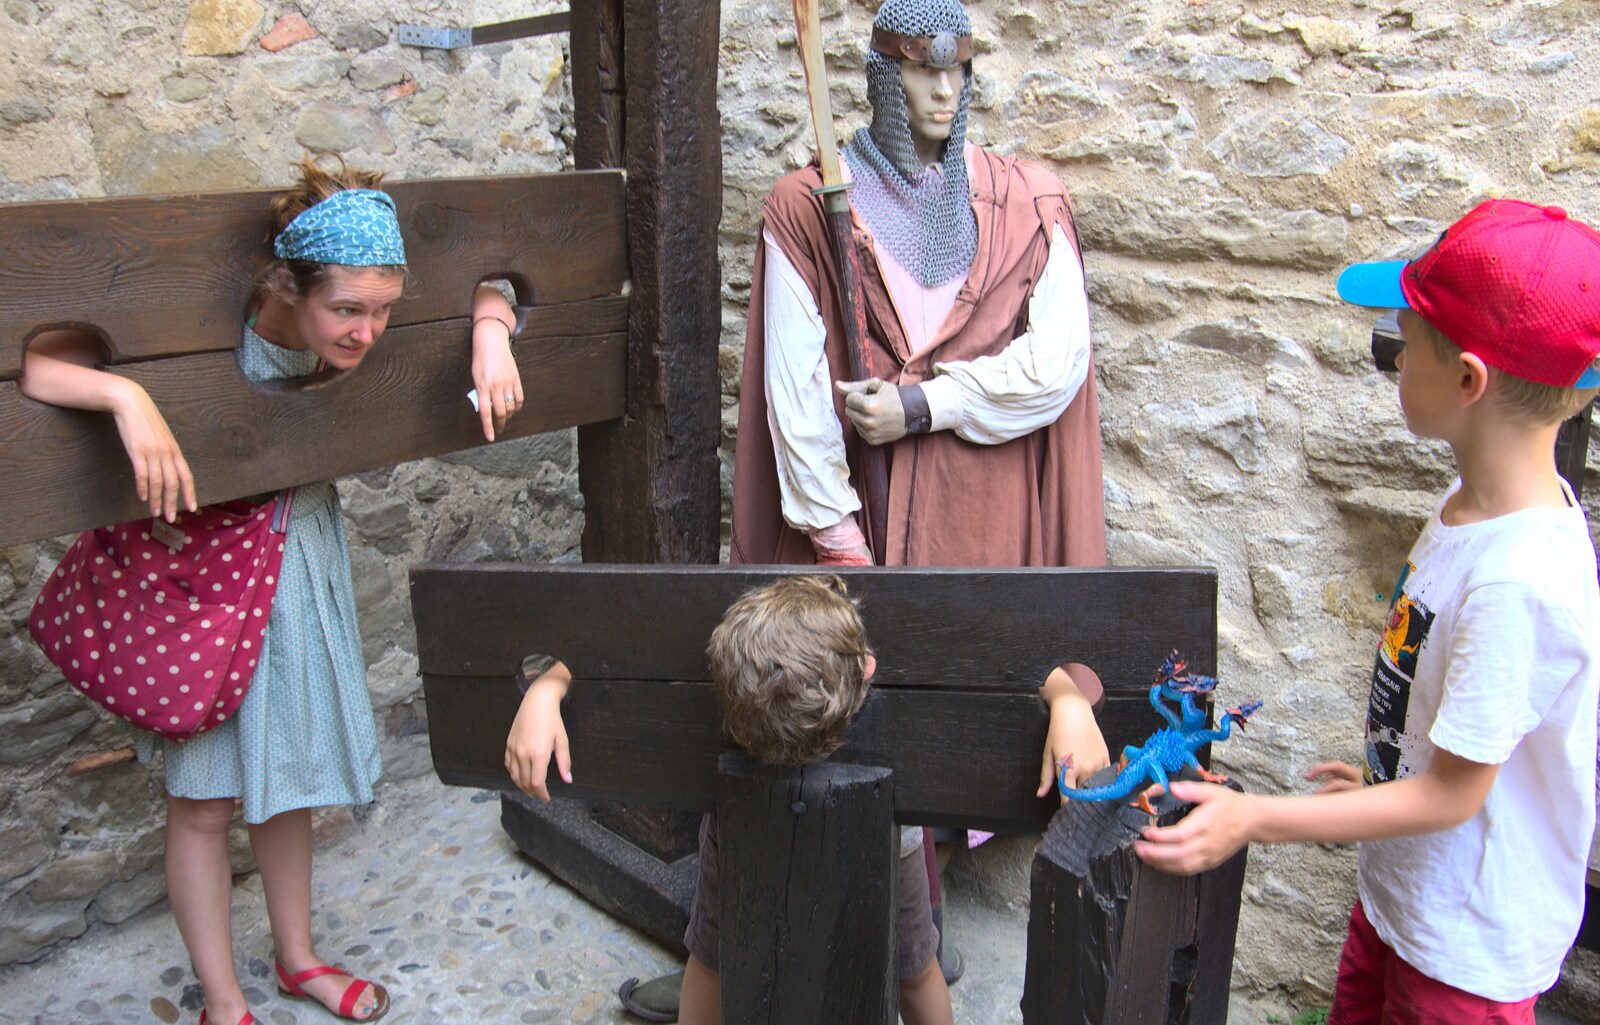 Isobel joins in at the Museum of Torture from A Trip to Carcassonne, Aude, France - 8th August 2018